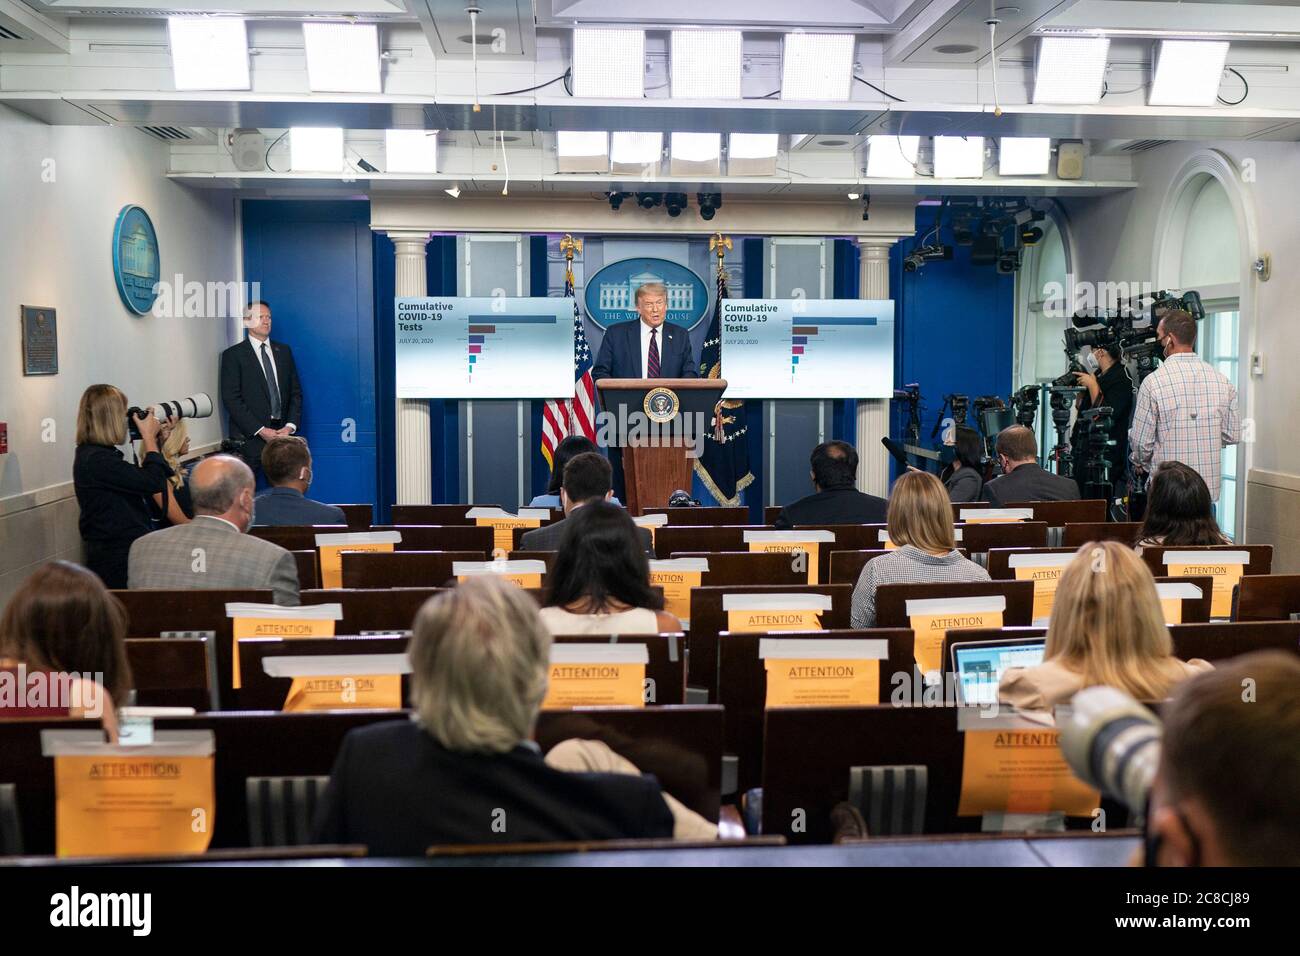 WASHINGTON DC, USA - 21 July 2020 - US President Donald J. Trump delivers remarks and answers questions from members of the press during a COVID-19 Co Stock Photo